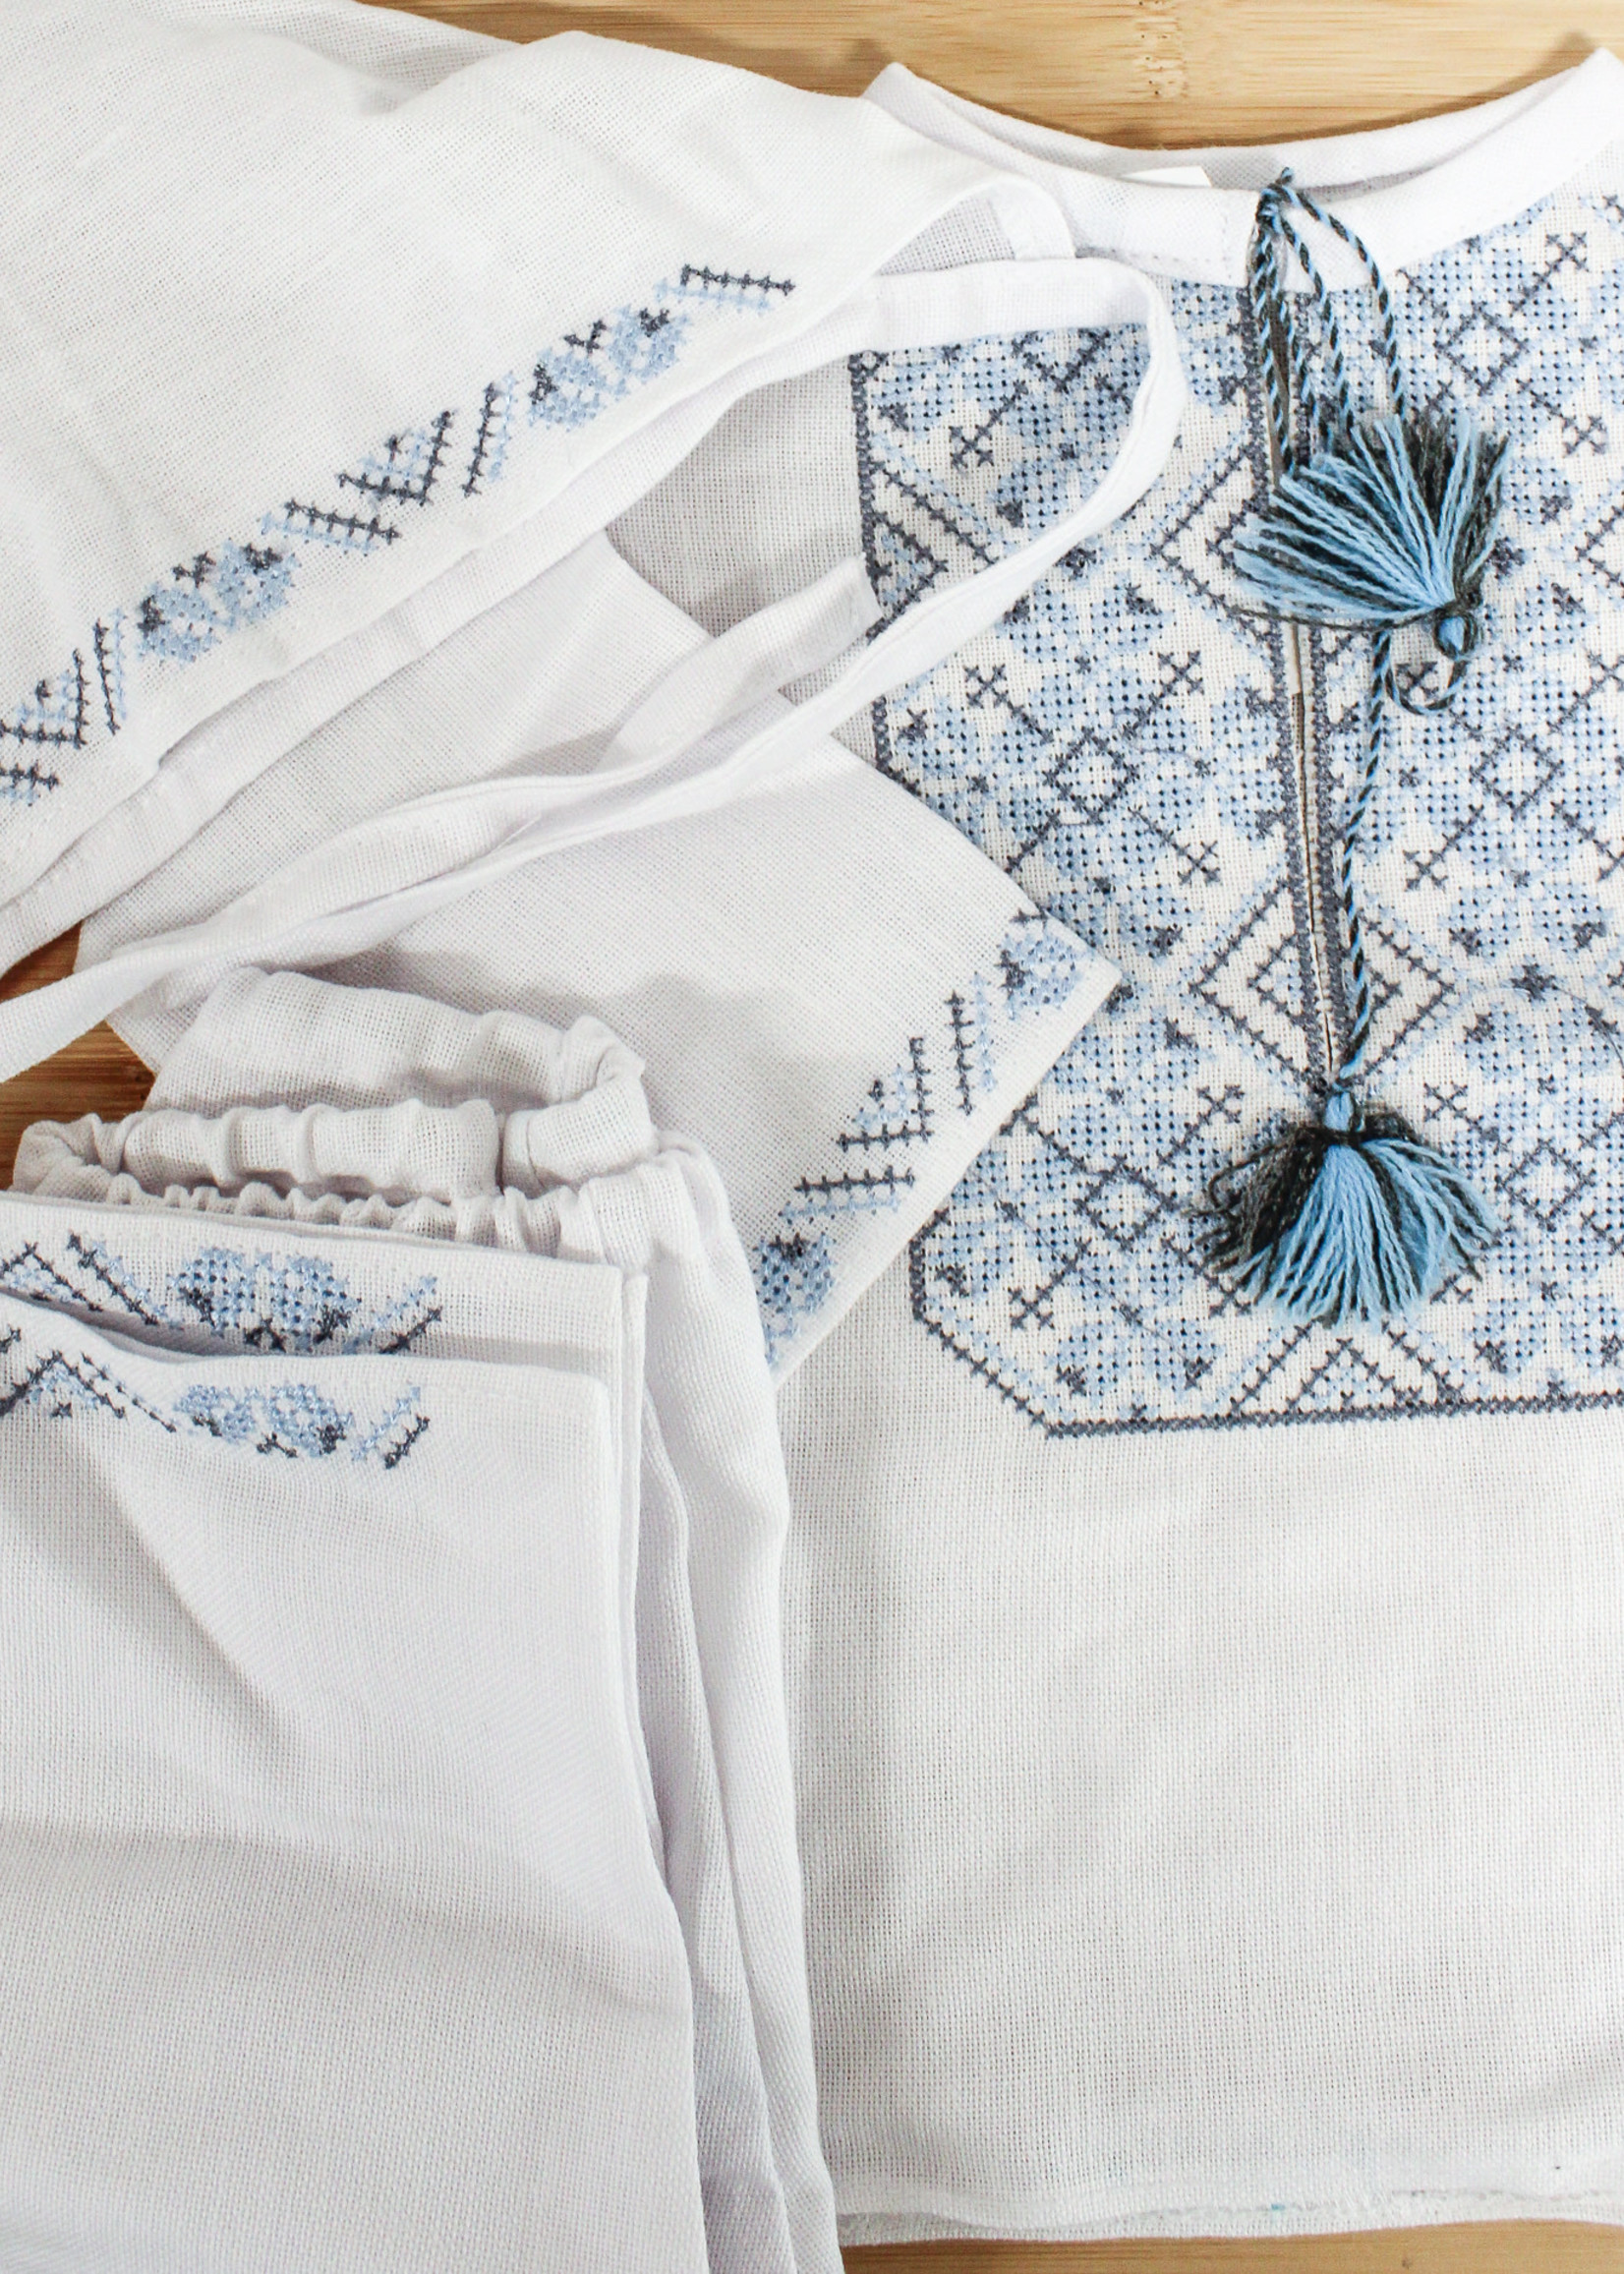 BABY SUIT - Light blue embroidered shirt, hat, & pants (boy)